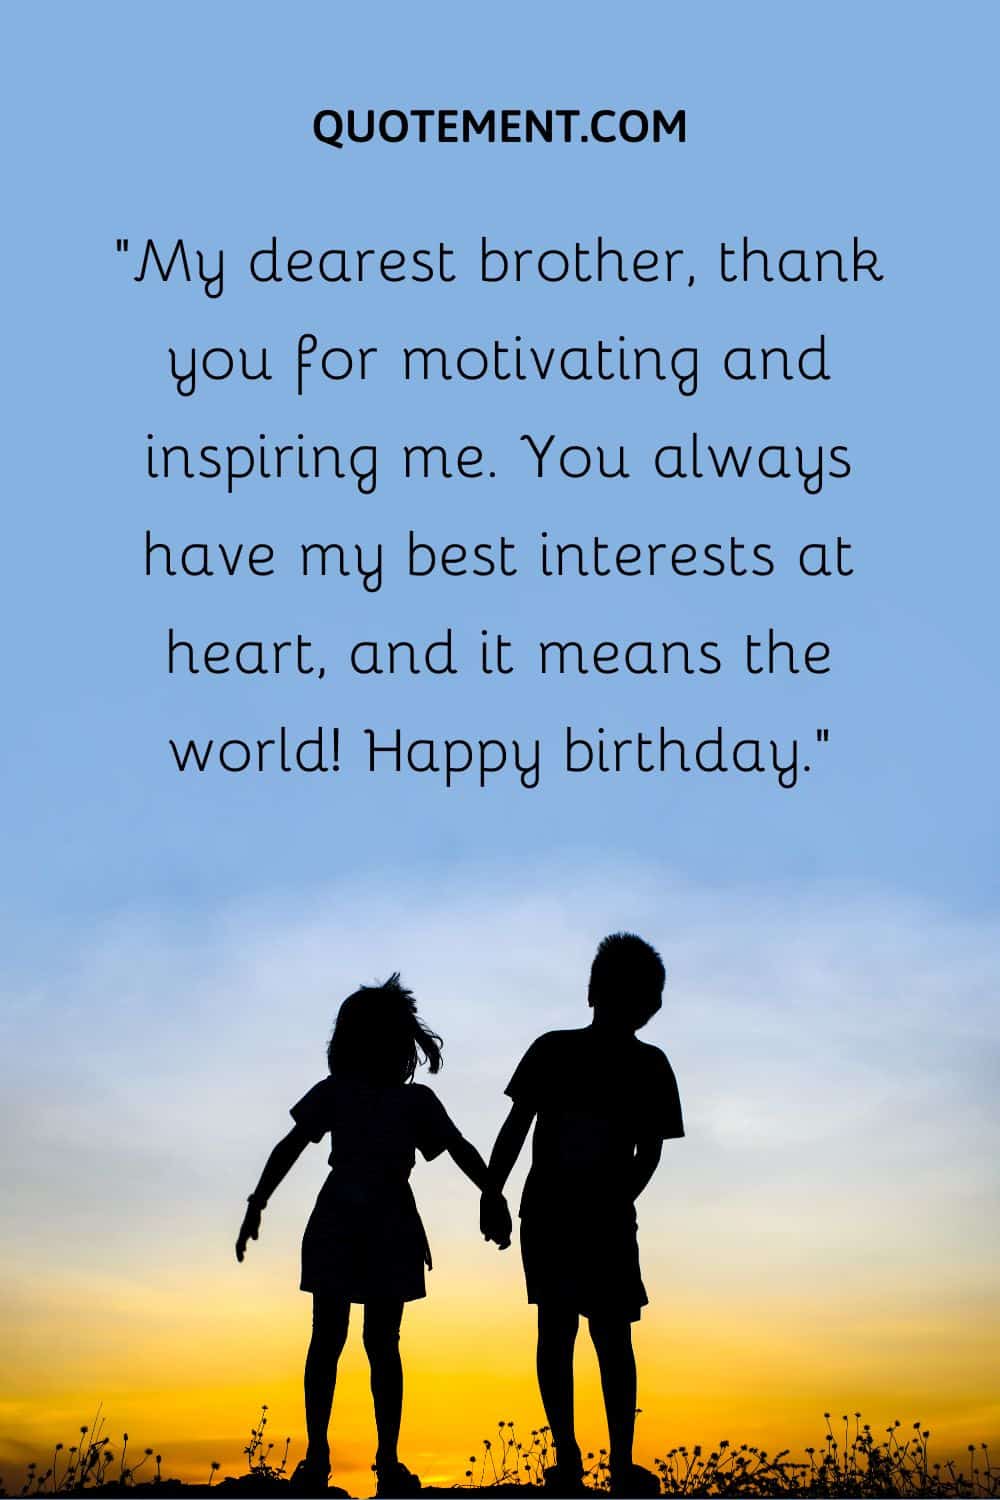 “My dearest brother, thank you for motivating and inspiring me. You always have my best interests at heart, and it means the world! Happy birthday.”